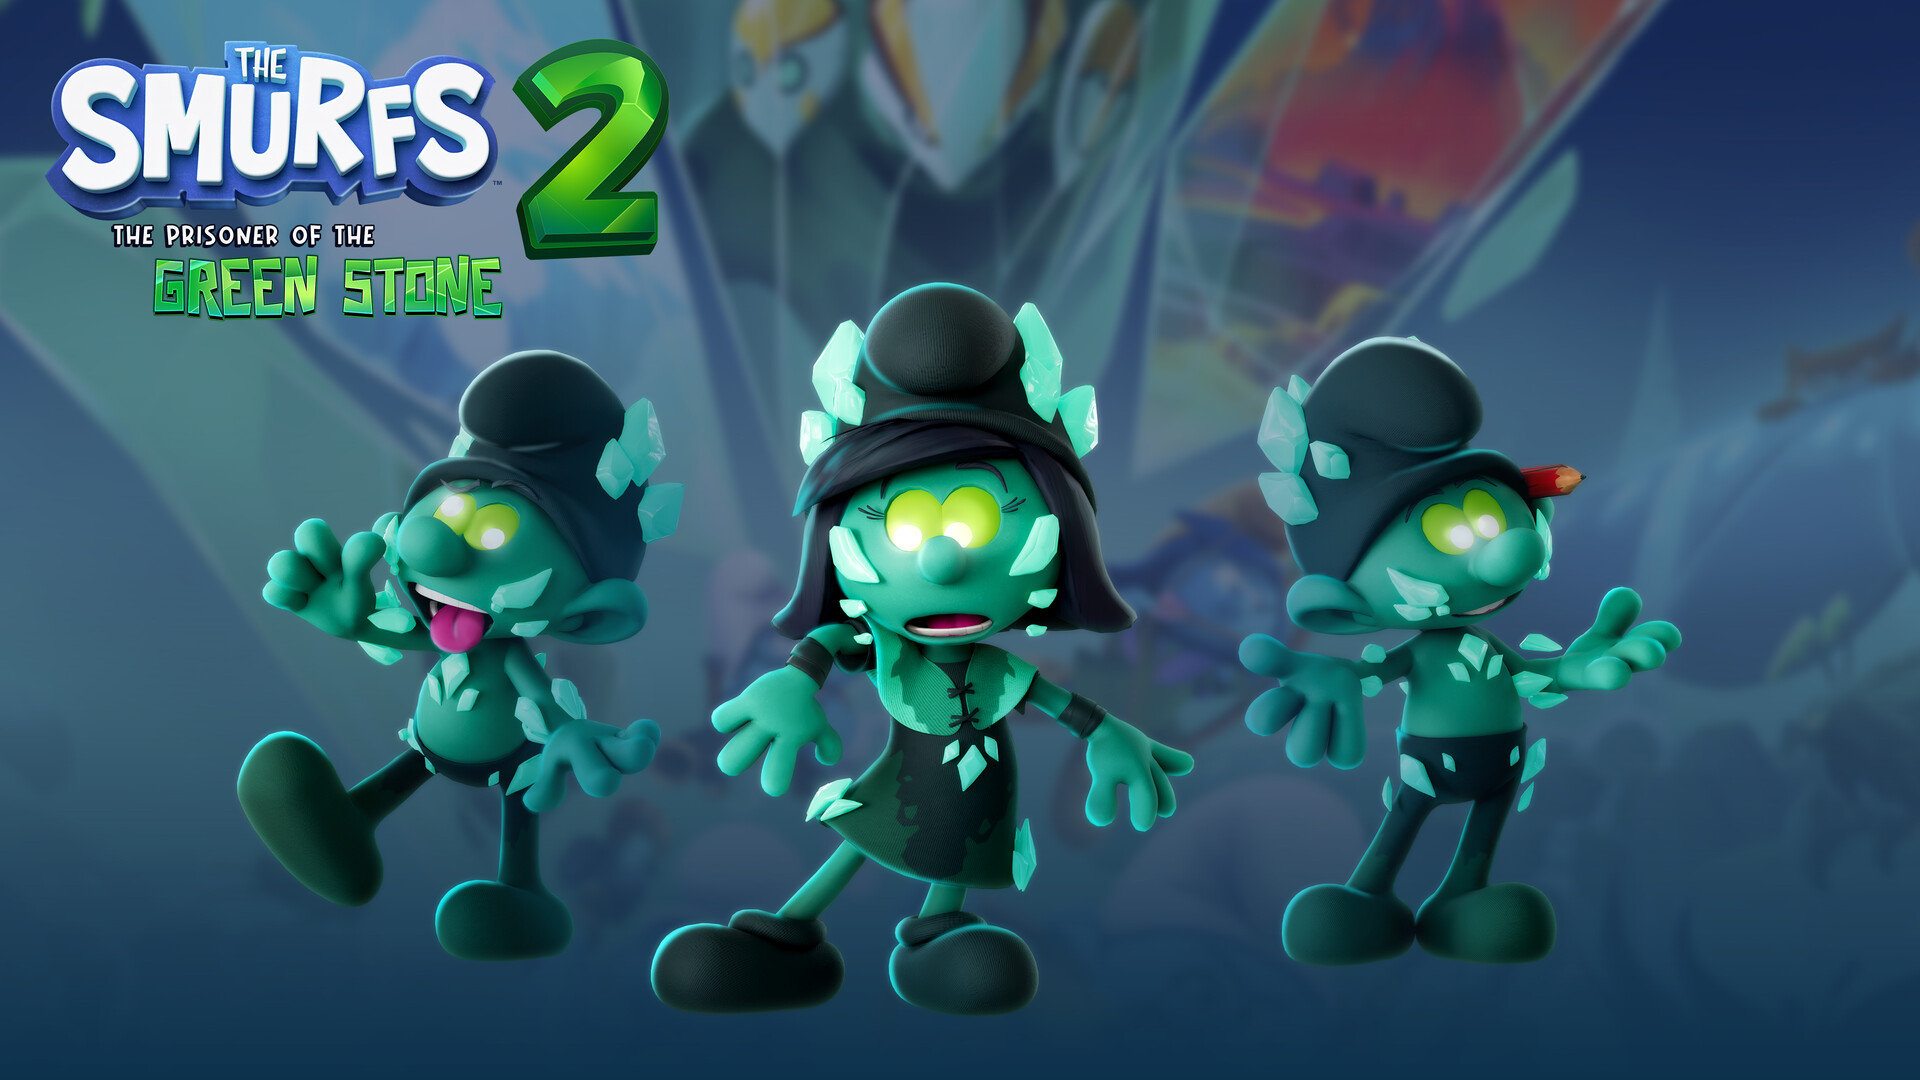 [$ 1.3] The Smurfs 2: The Prisoner of the Green Stone - Corrupted Outfit DLC GOG CD Key